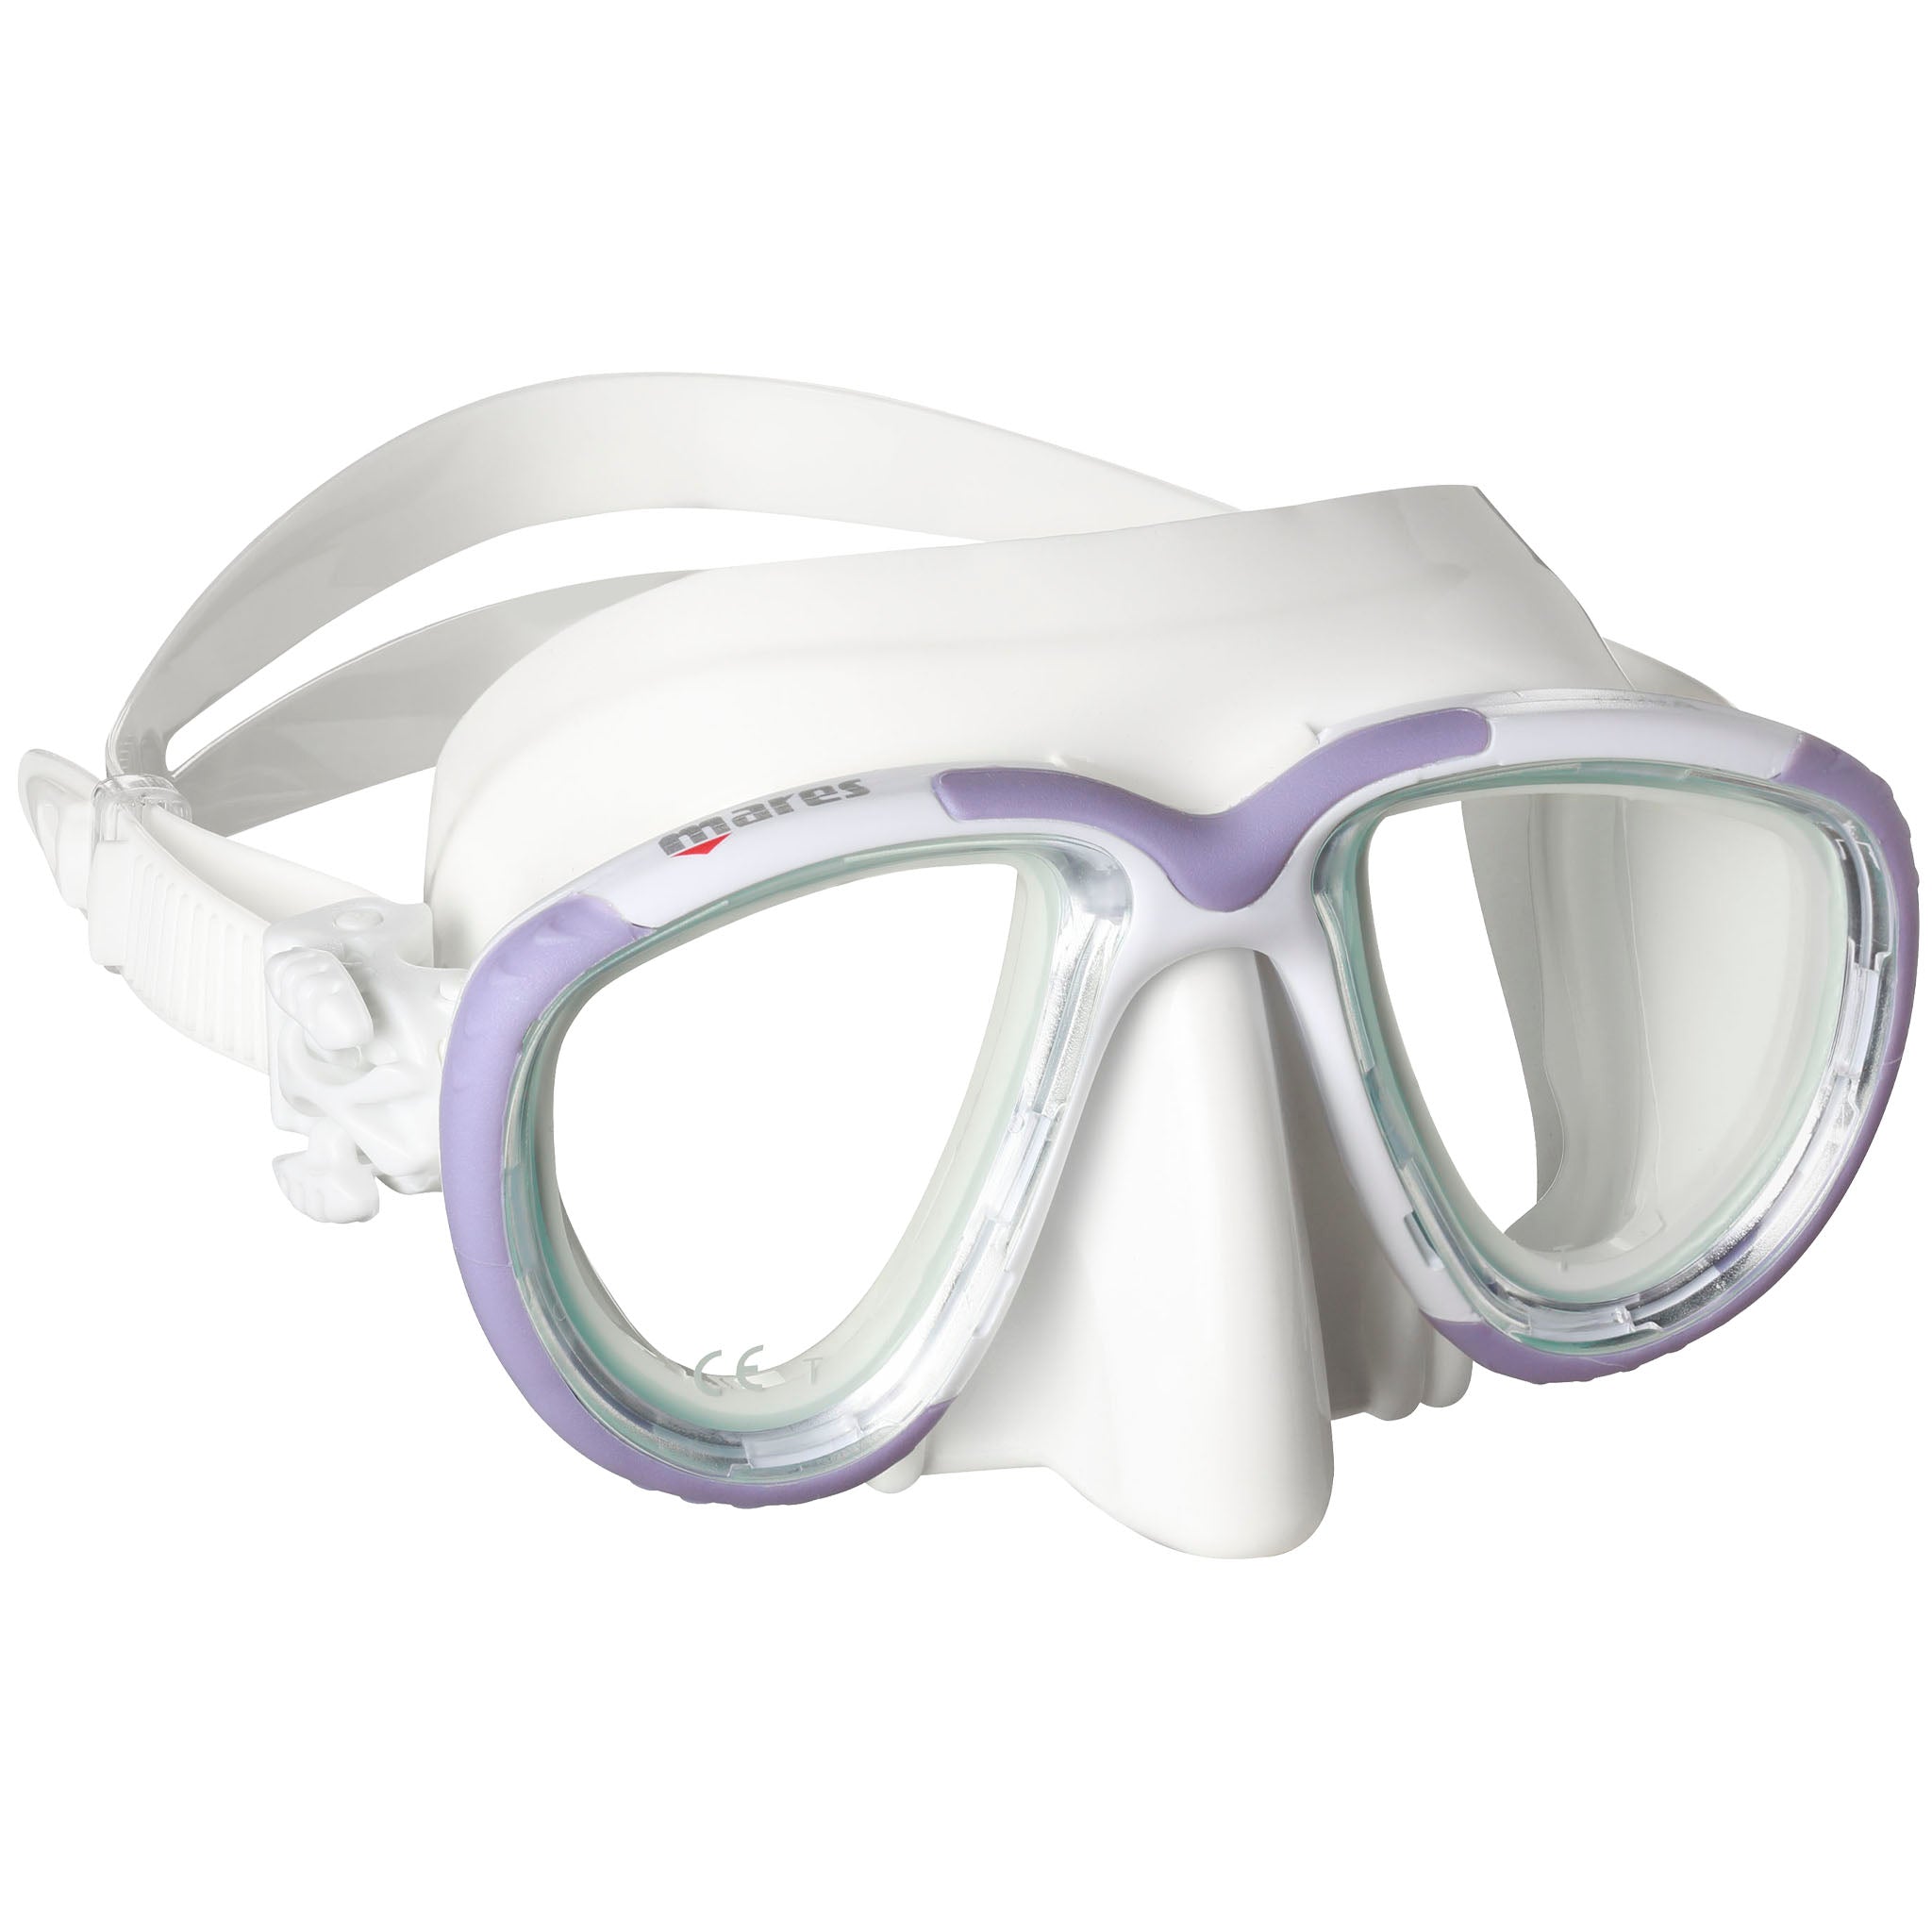 Mares Tana Diving, Snorkelling and Freediving Mask - White Purple White